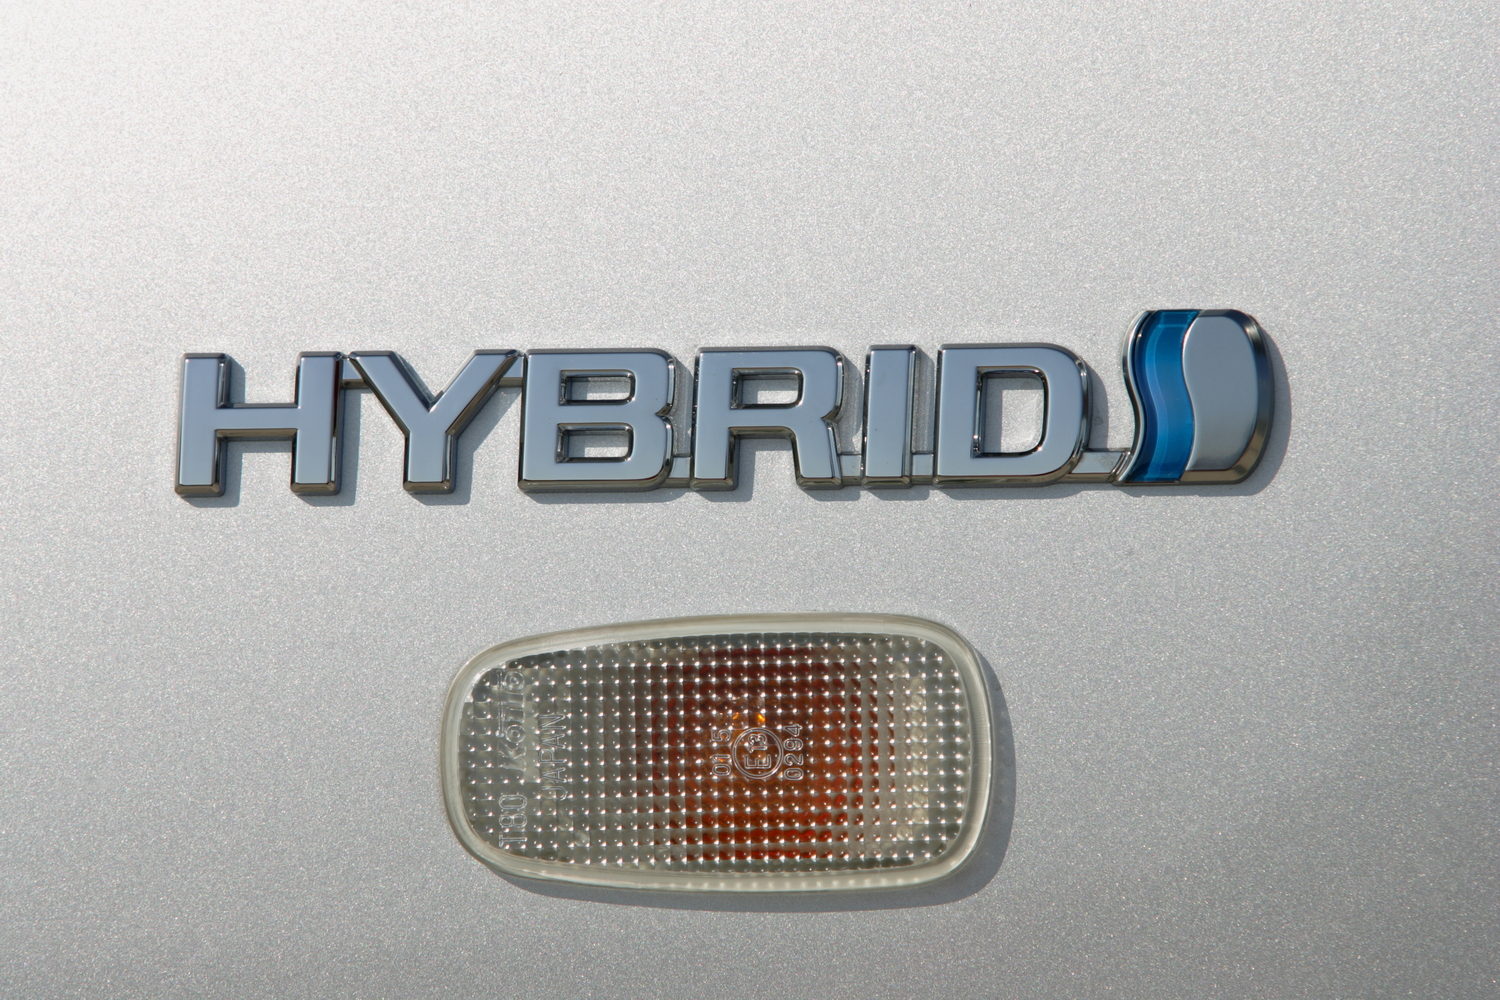 Why are hybrid Toyotas so popular in Ireland?